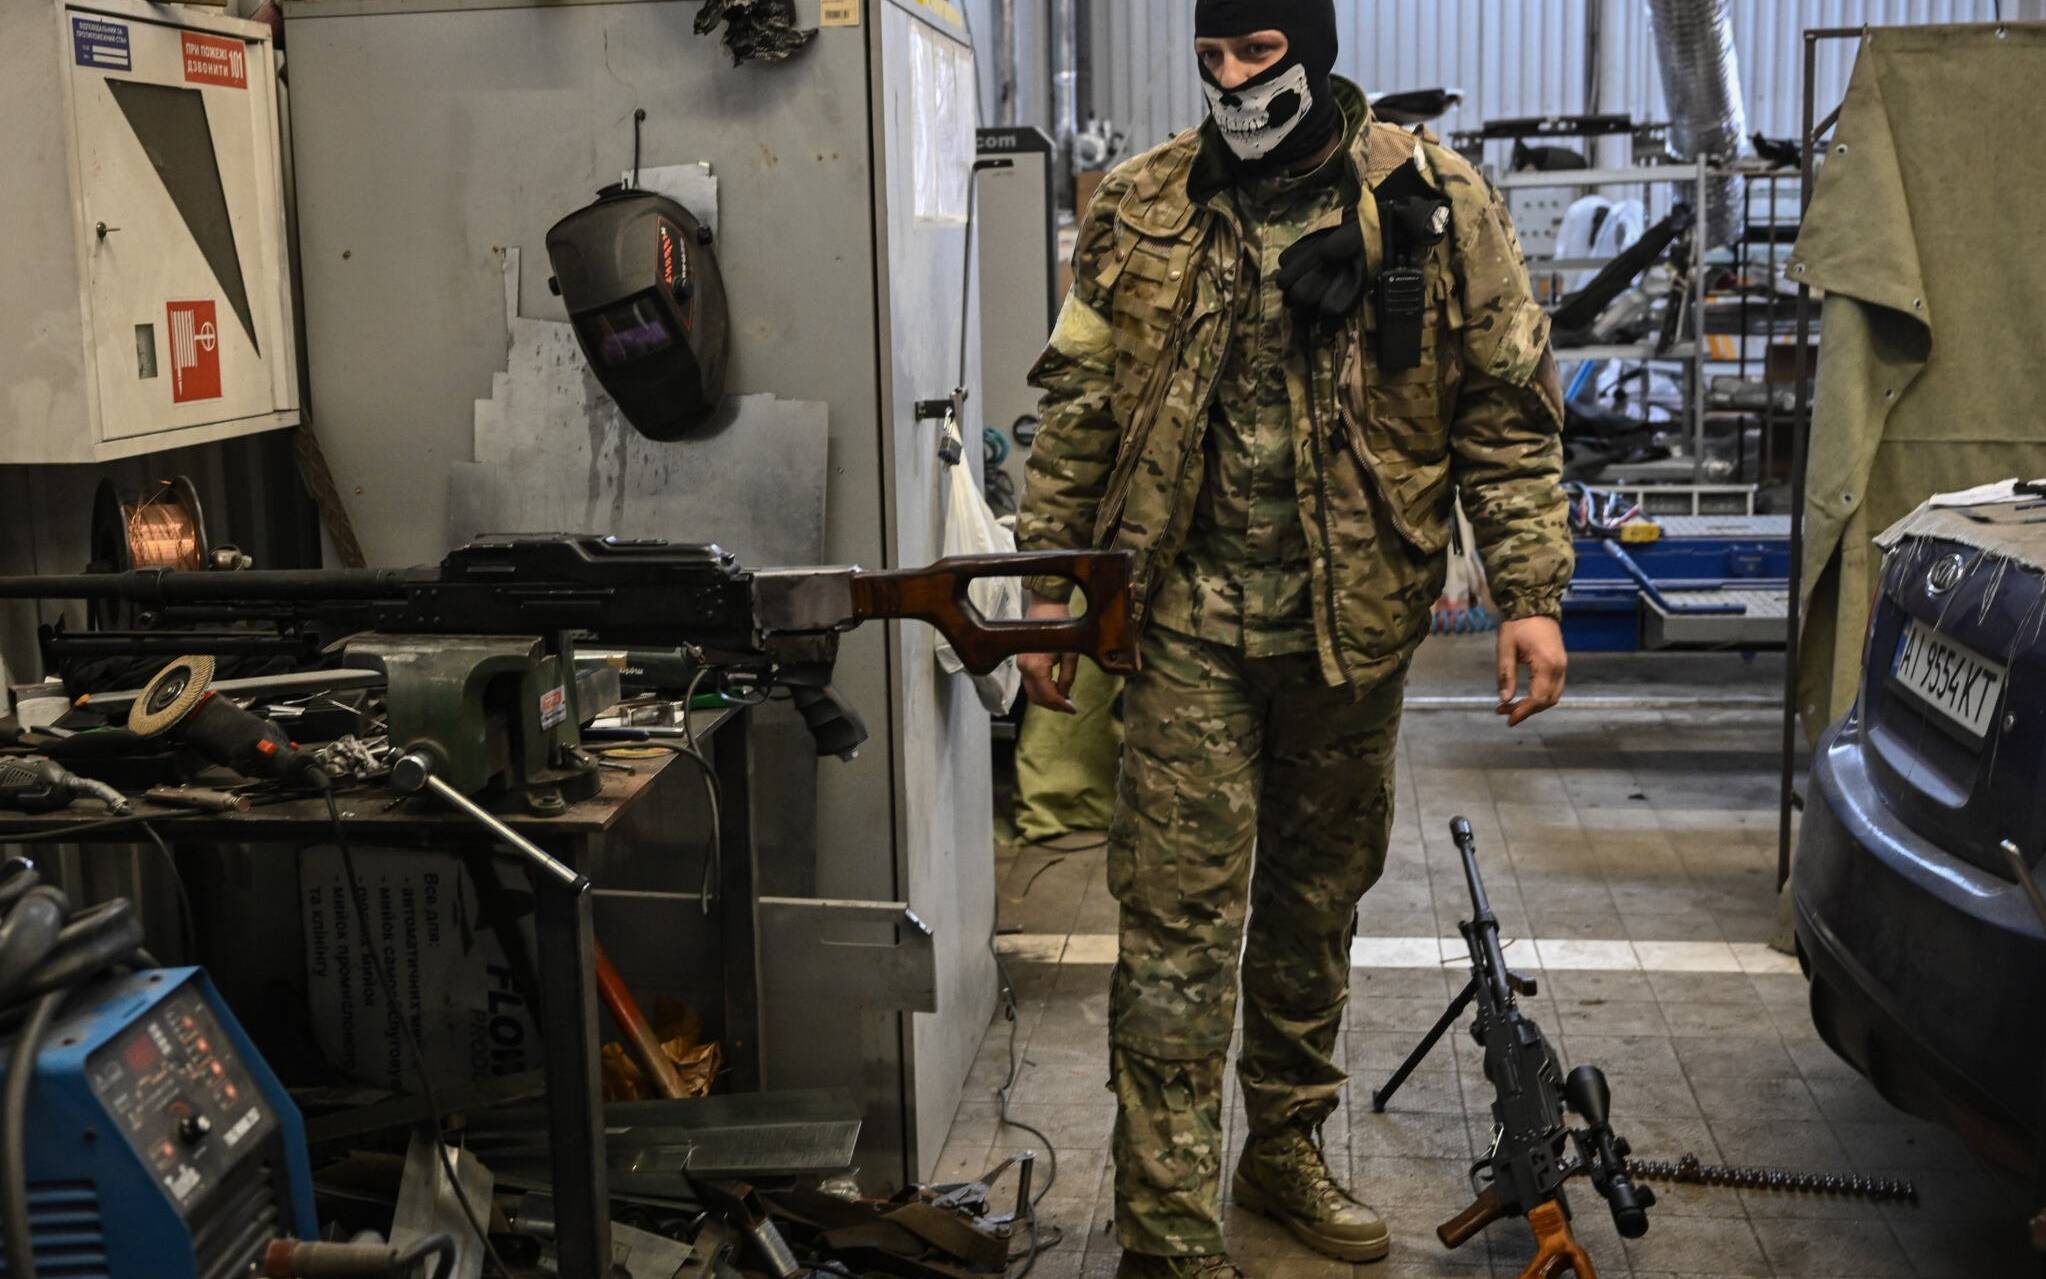 A volunteer stands inside an auto repair shop as he reconditions machine guns that were taken from the Russian army, in Kyiv on March 6, 2022. (Photo by ARIS MESSINIS / AFP)